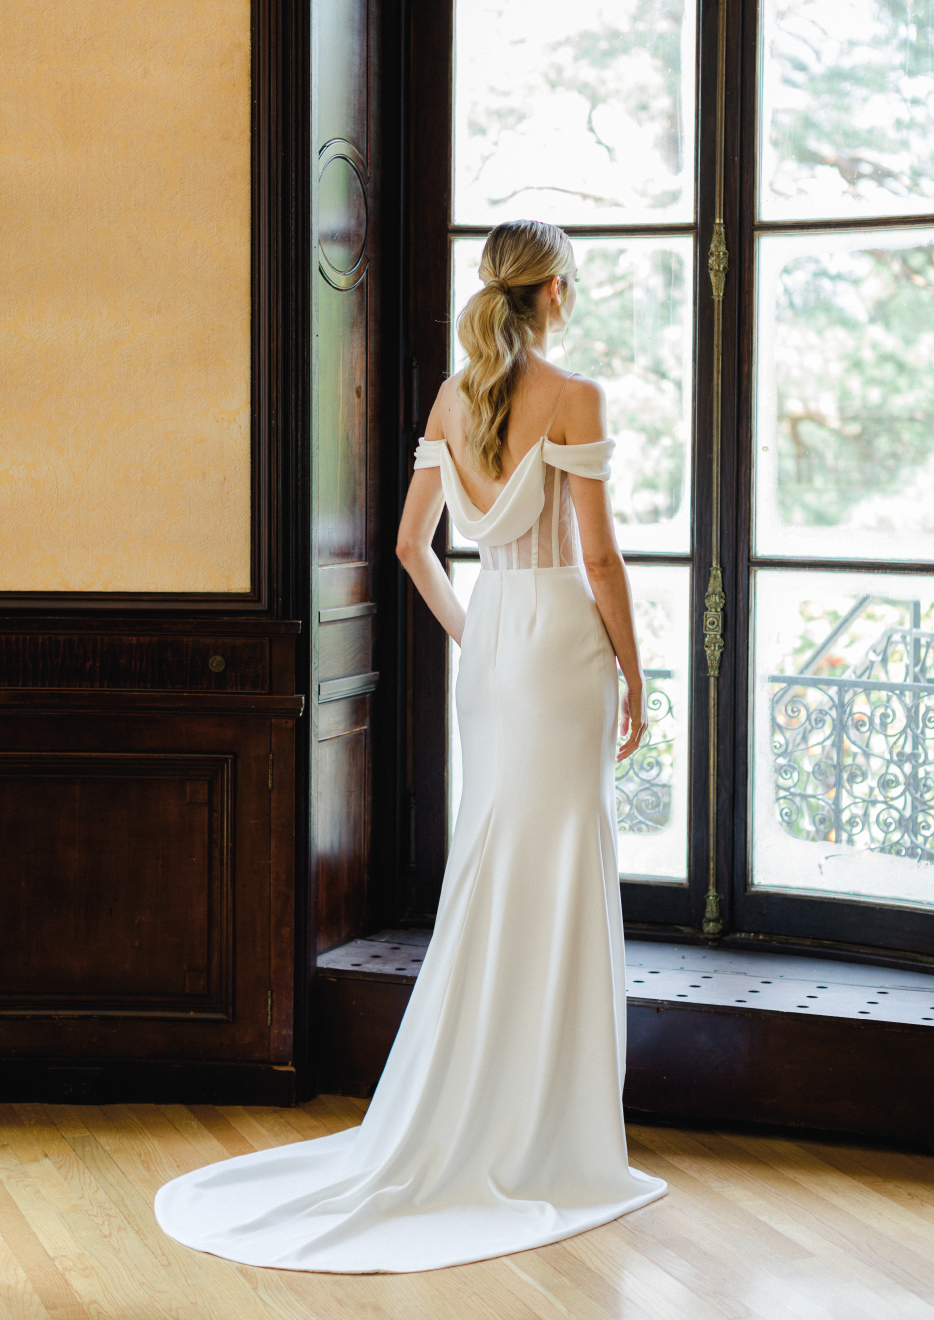 Bridal Dress Model Victoria - Dress with off the shoulder style, draped stretch gown with dramatic trumpet skirt and chapel train - Verdin New York